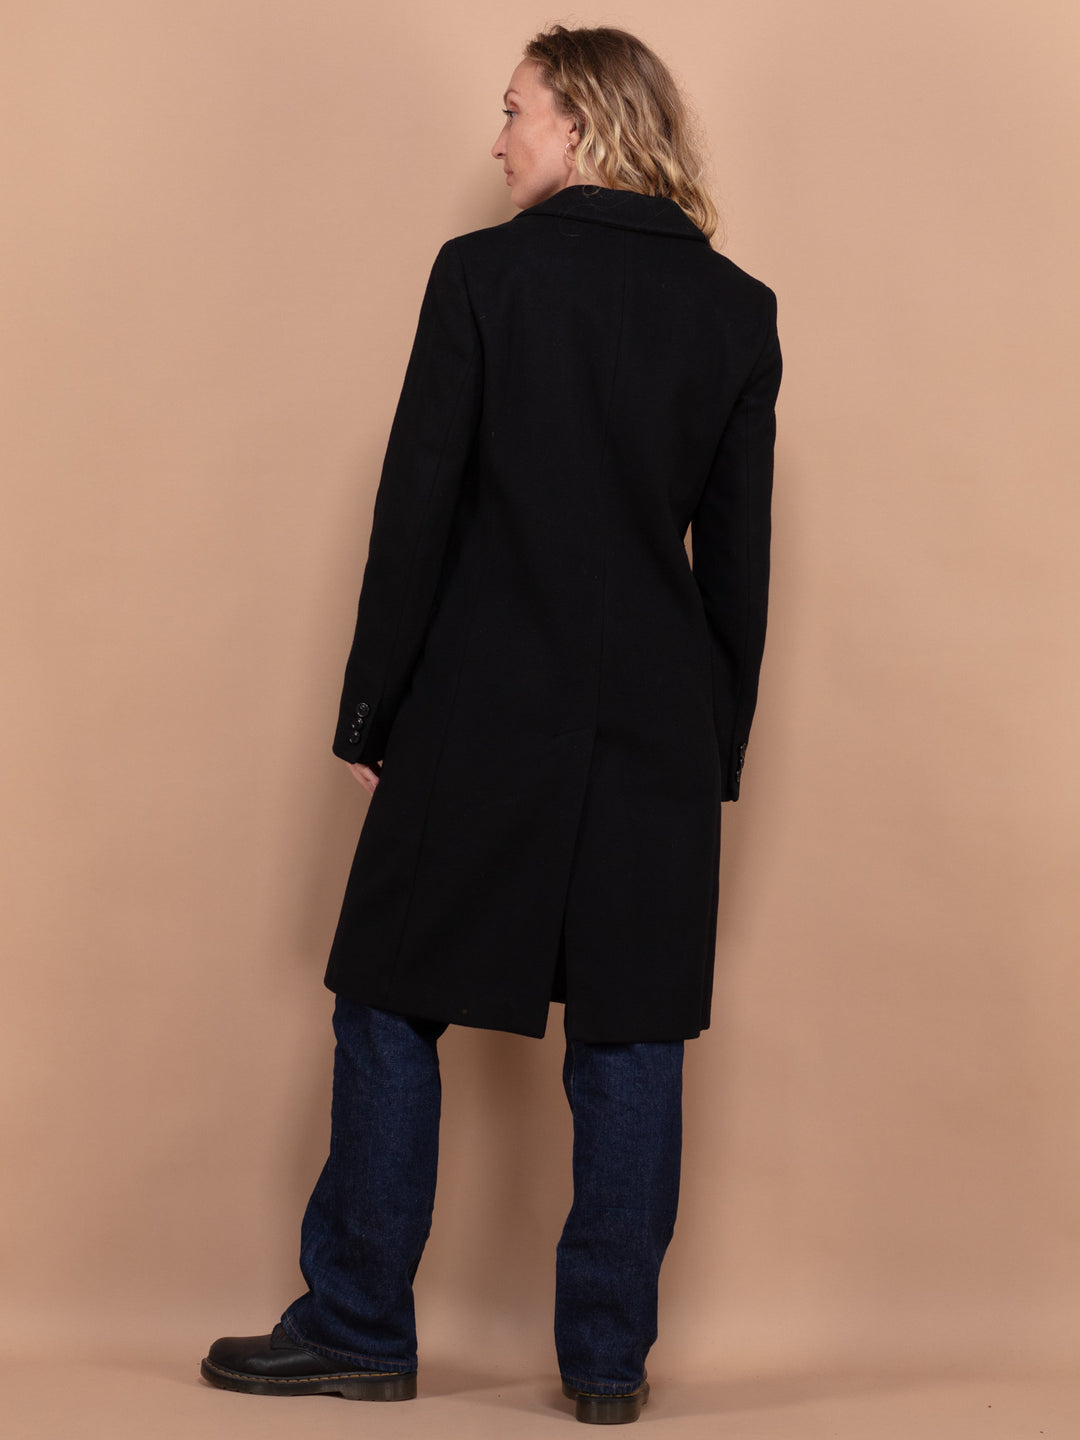 Cashmere and Wool Coat 00's, Size S Small, Esprit Women Coat, Classic Elegant Black Wool Overcoat, Office Outfit, Minimalist Outerwear